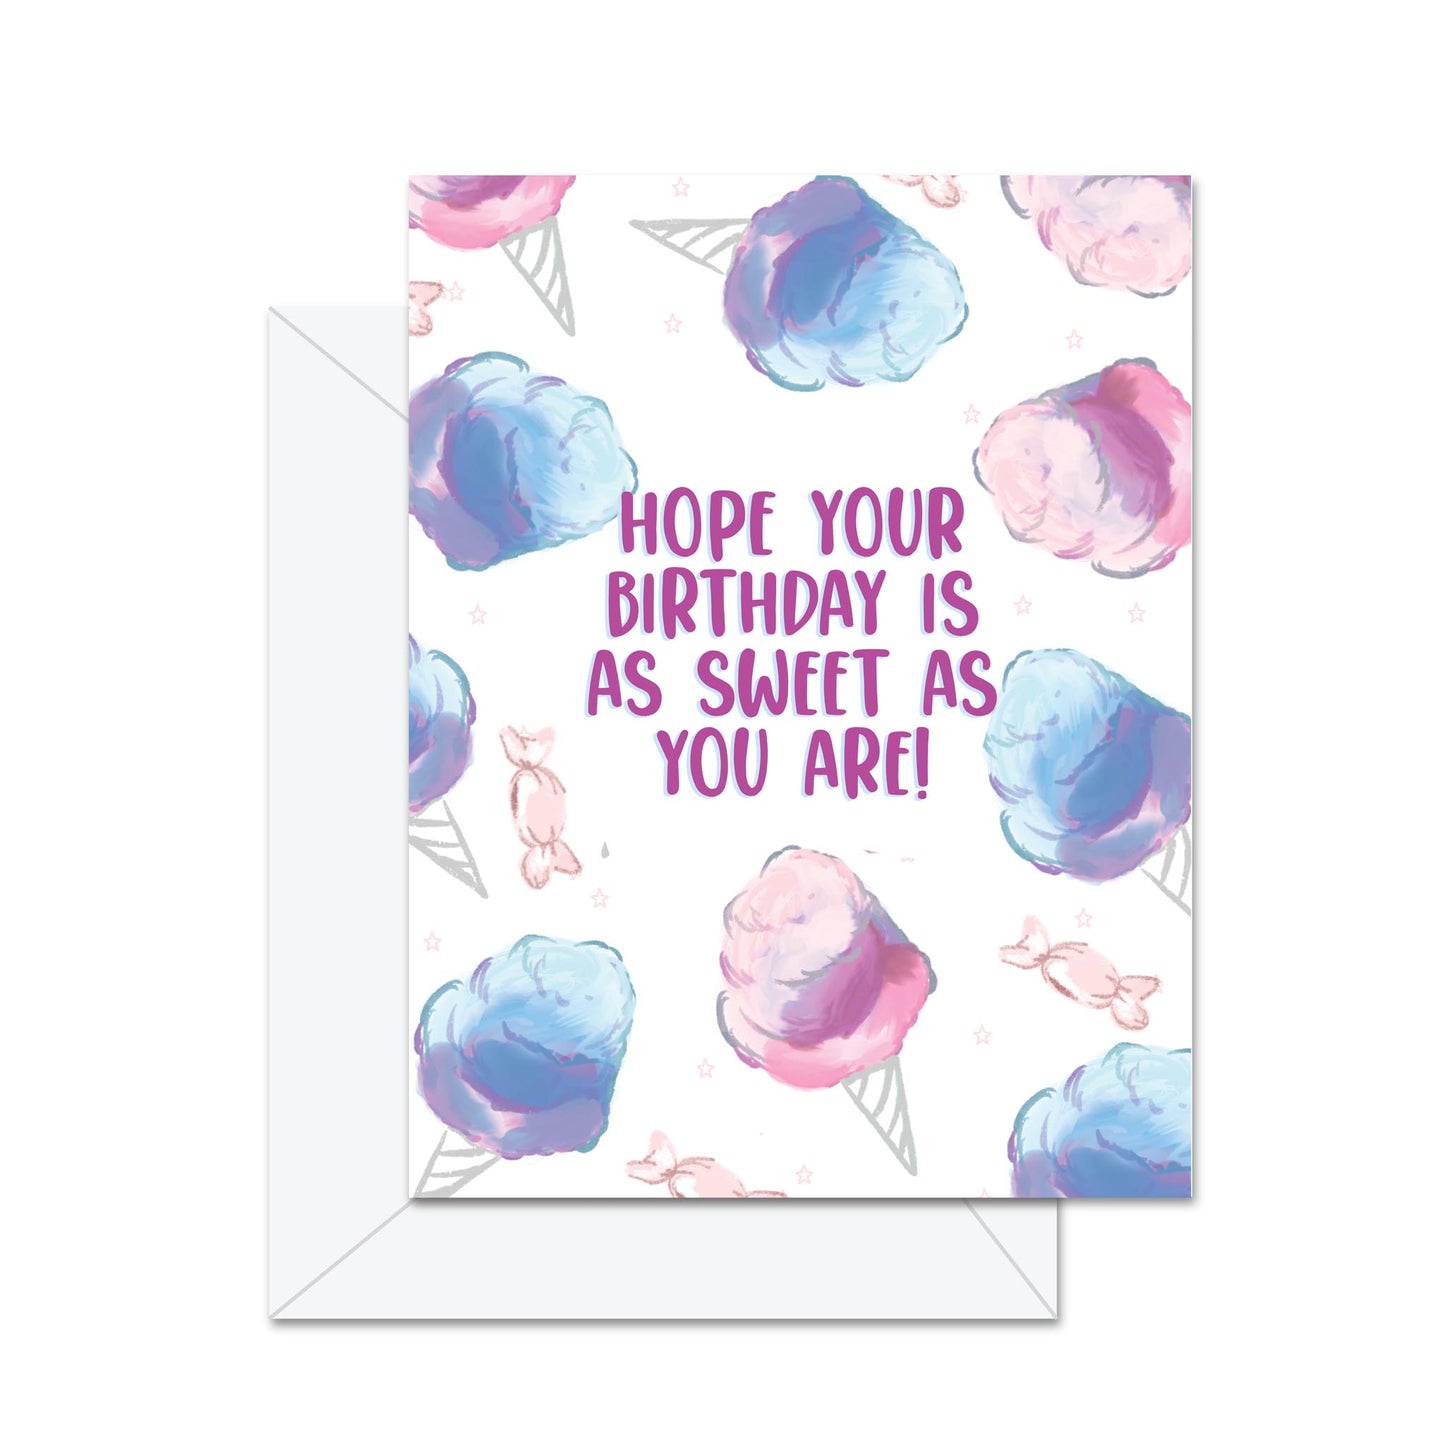 Hope Your Birthday Is As Sweet As You Are!  - Greeting Card